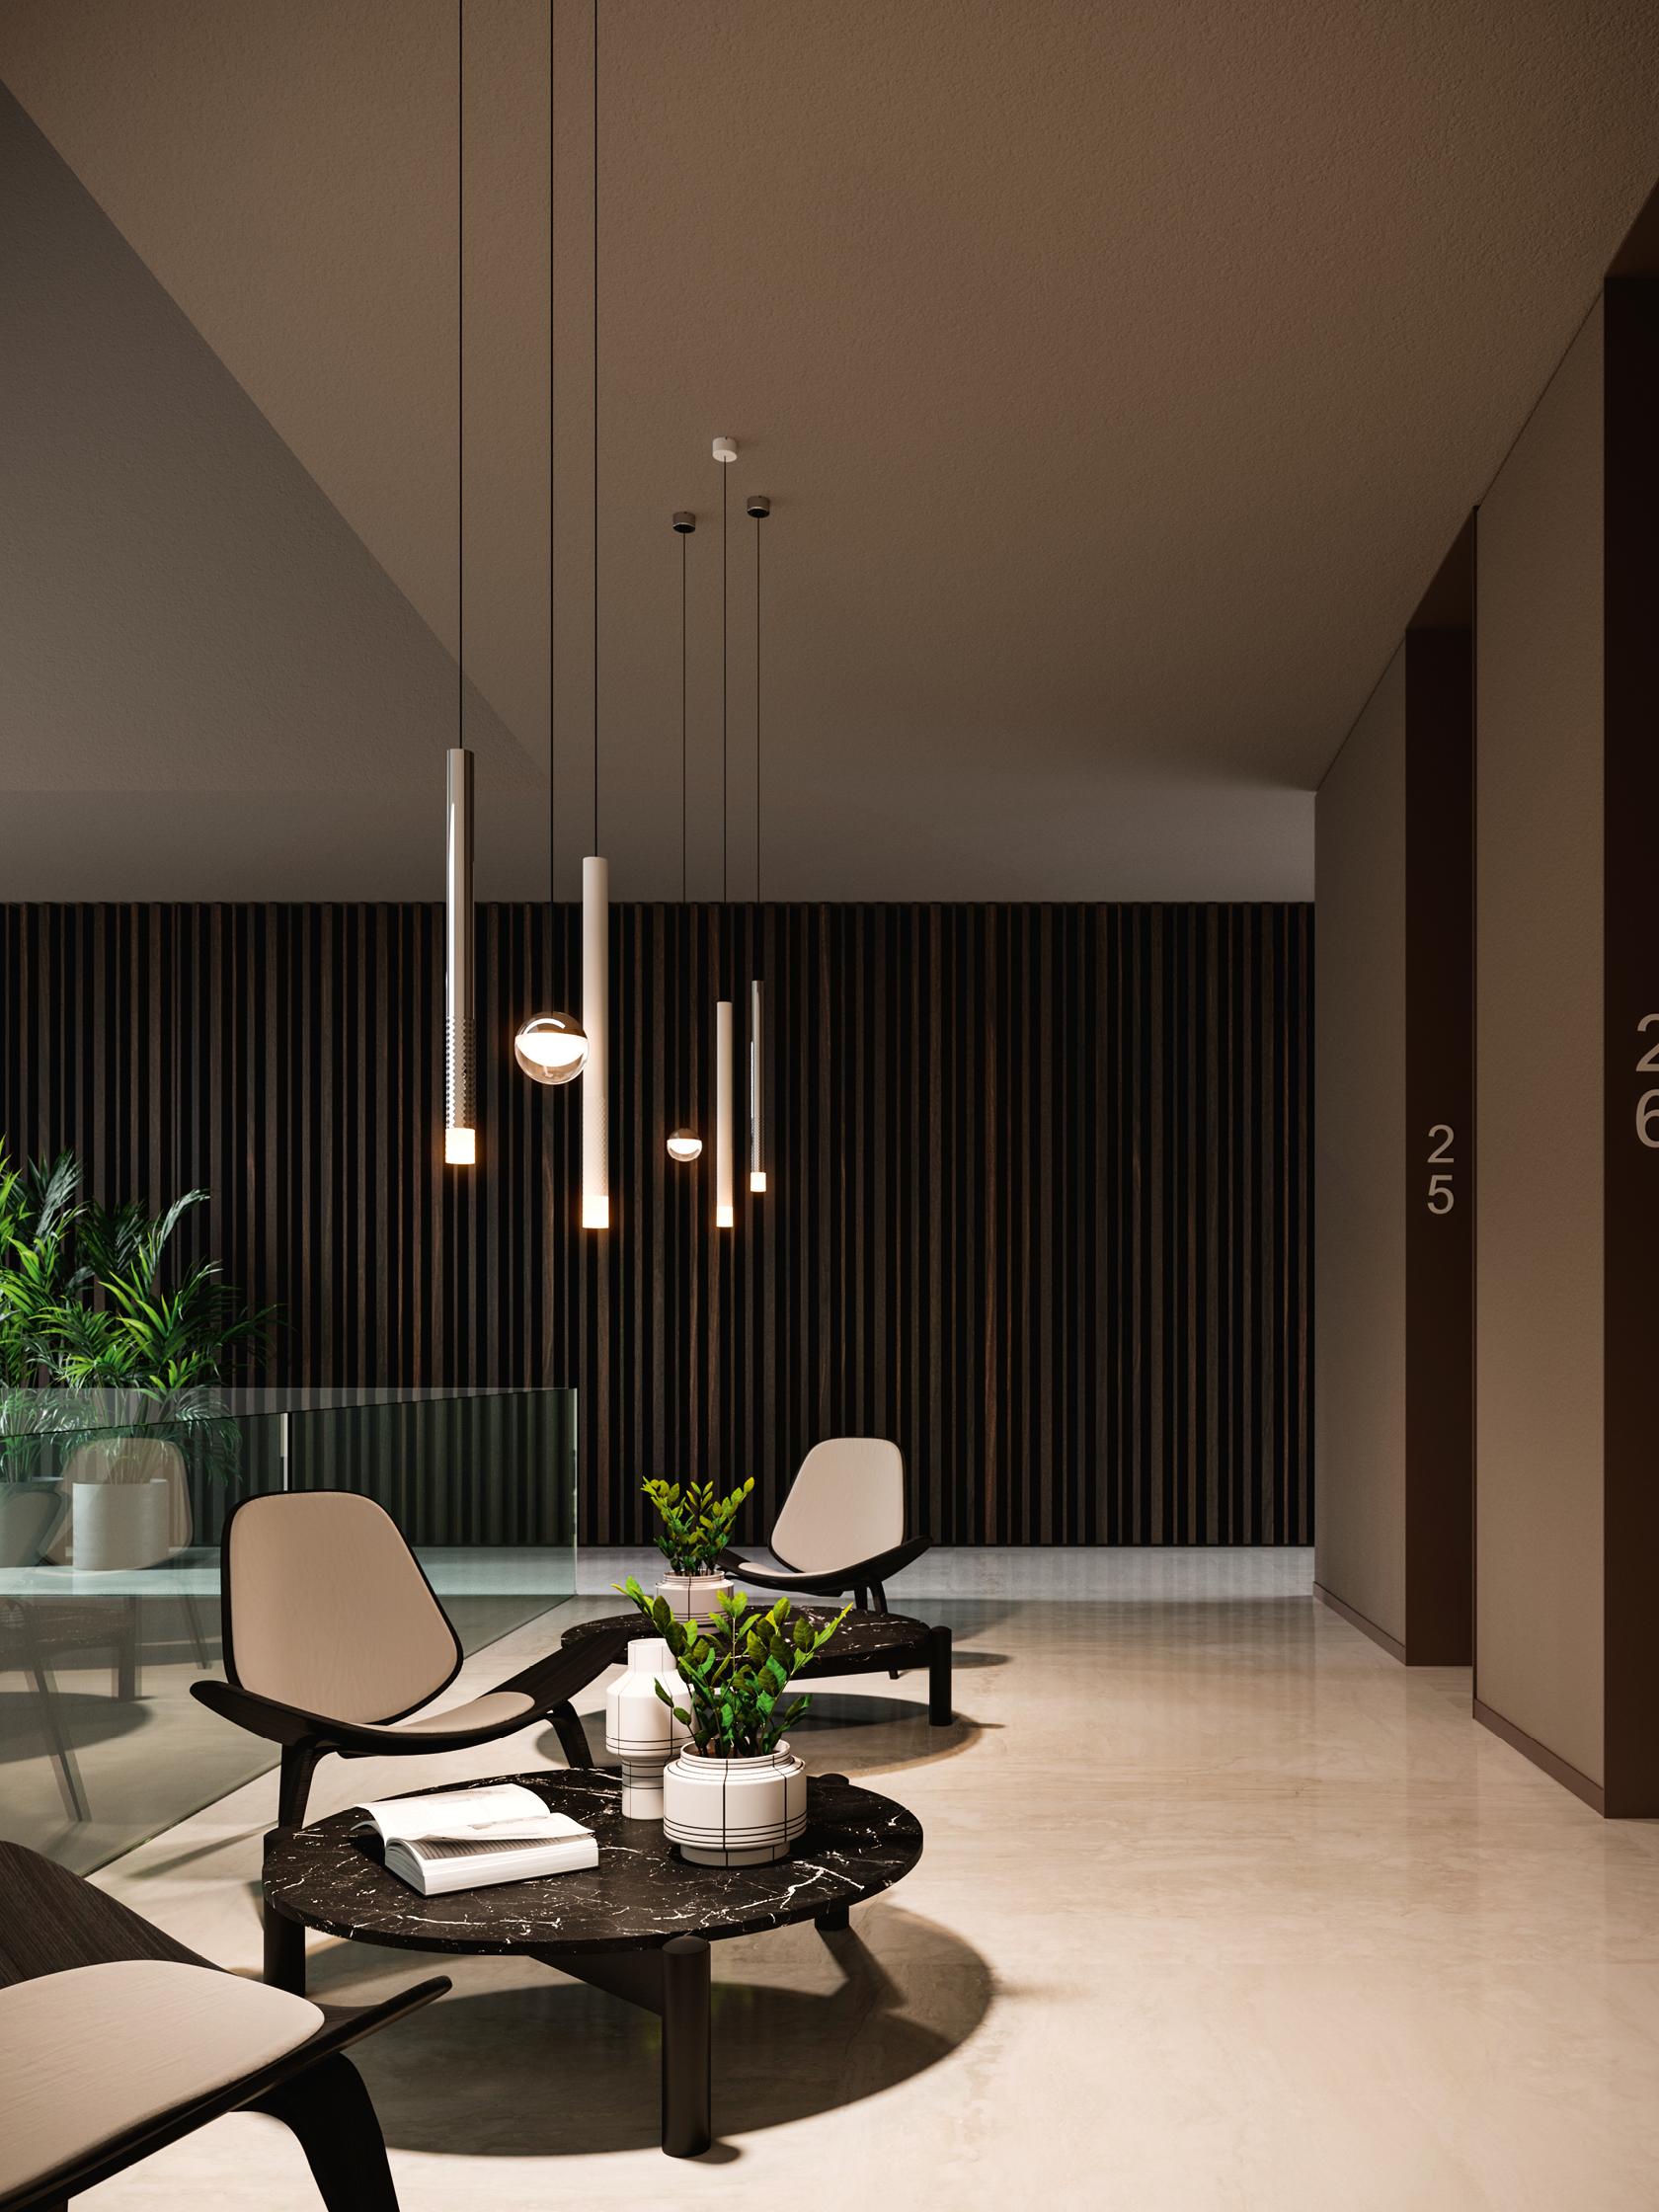 Gallery Product Sinfonia Puccini Suspension Linealightgroup